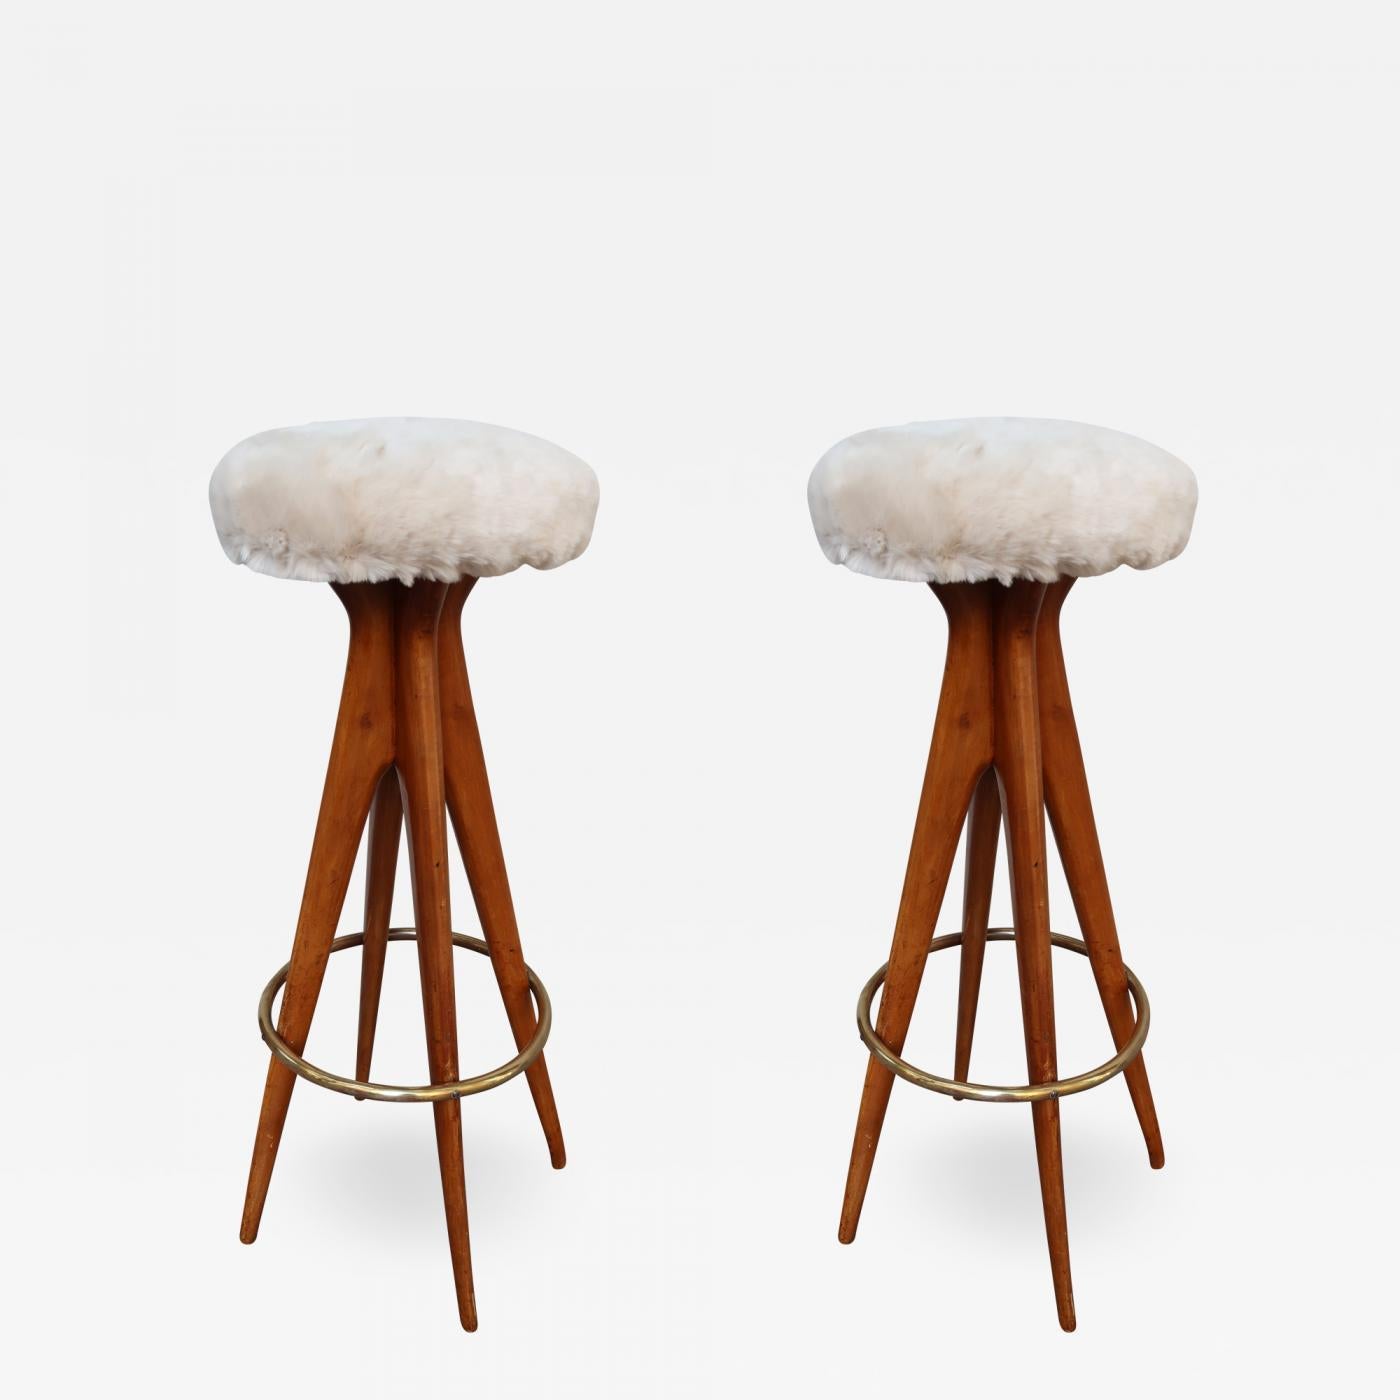 Pair of wood, brass and leather stools, Italy, 1950. Excellent condition.